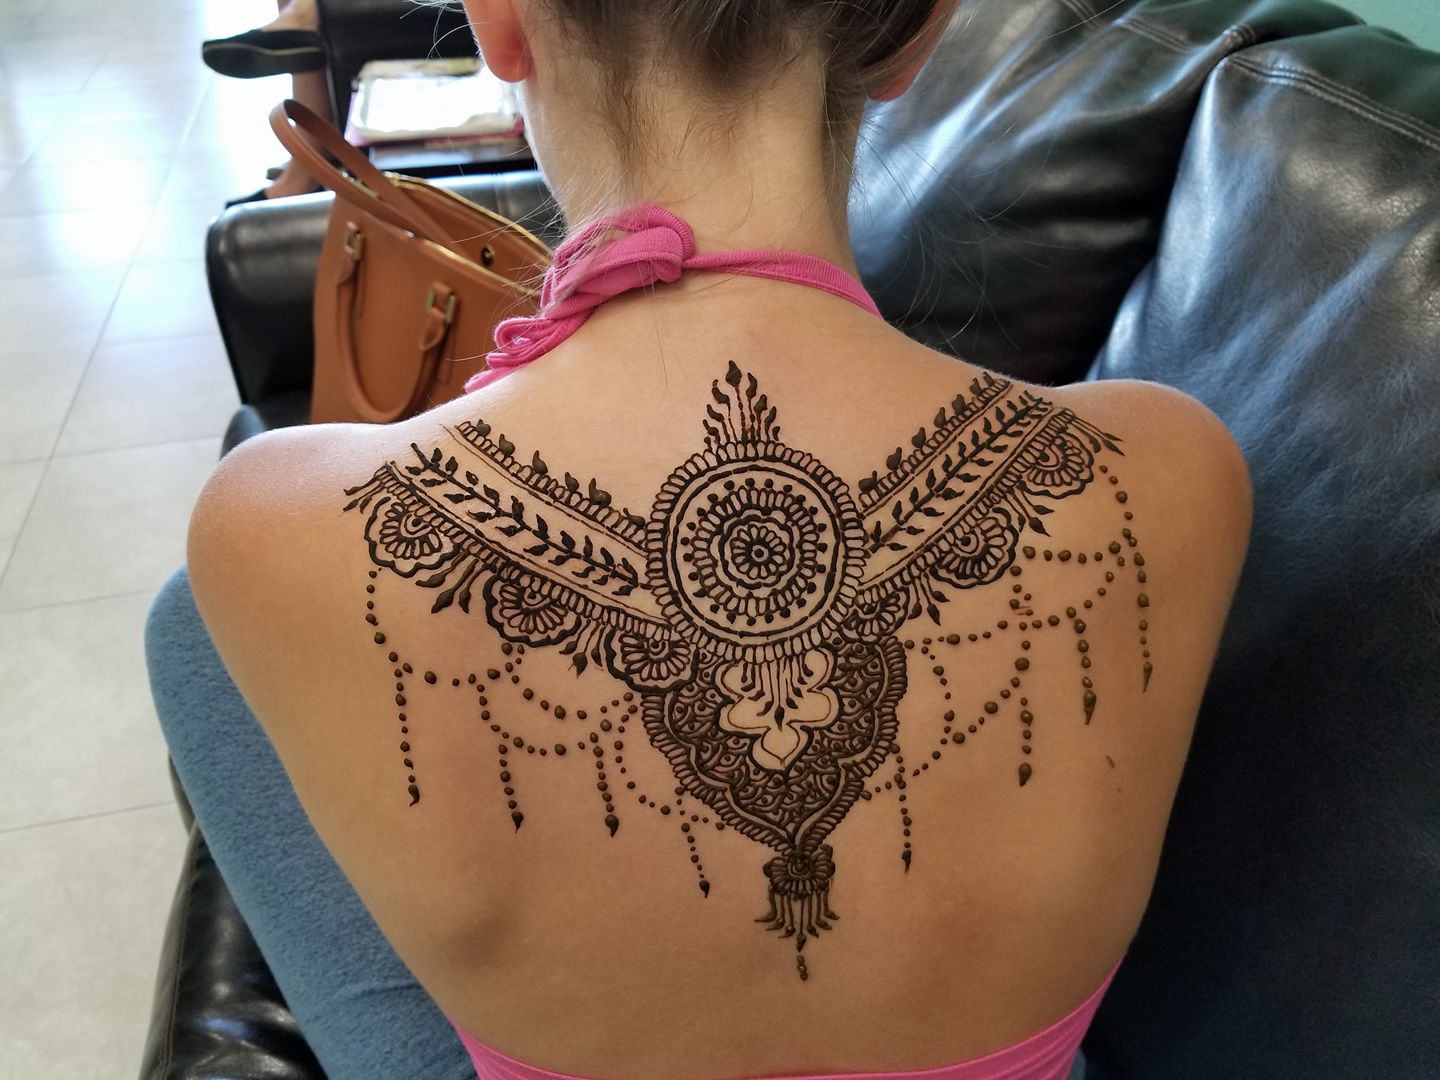 A woman with henna tattoos on her back.